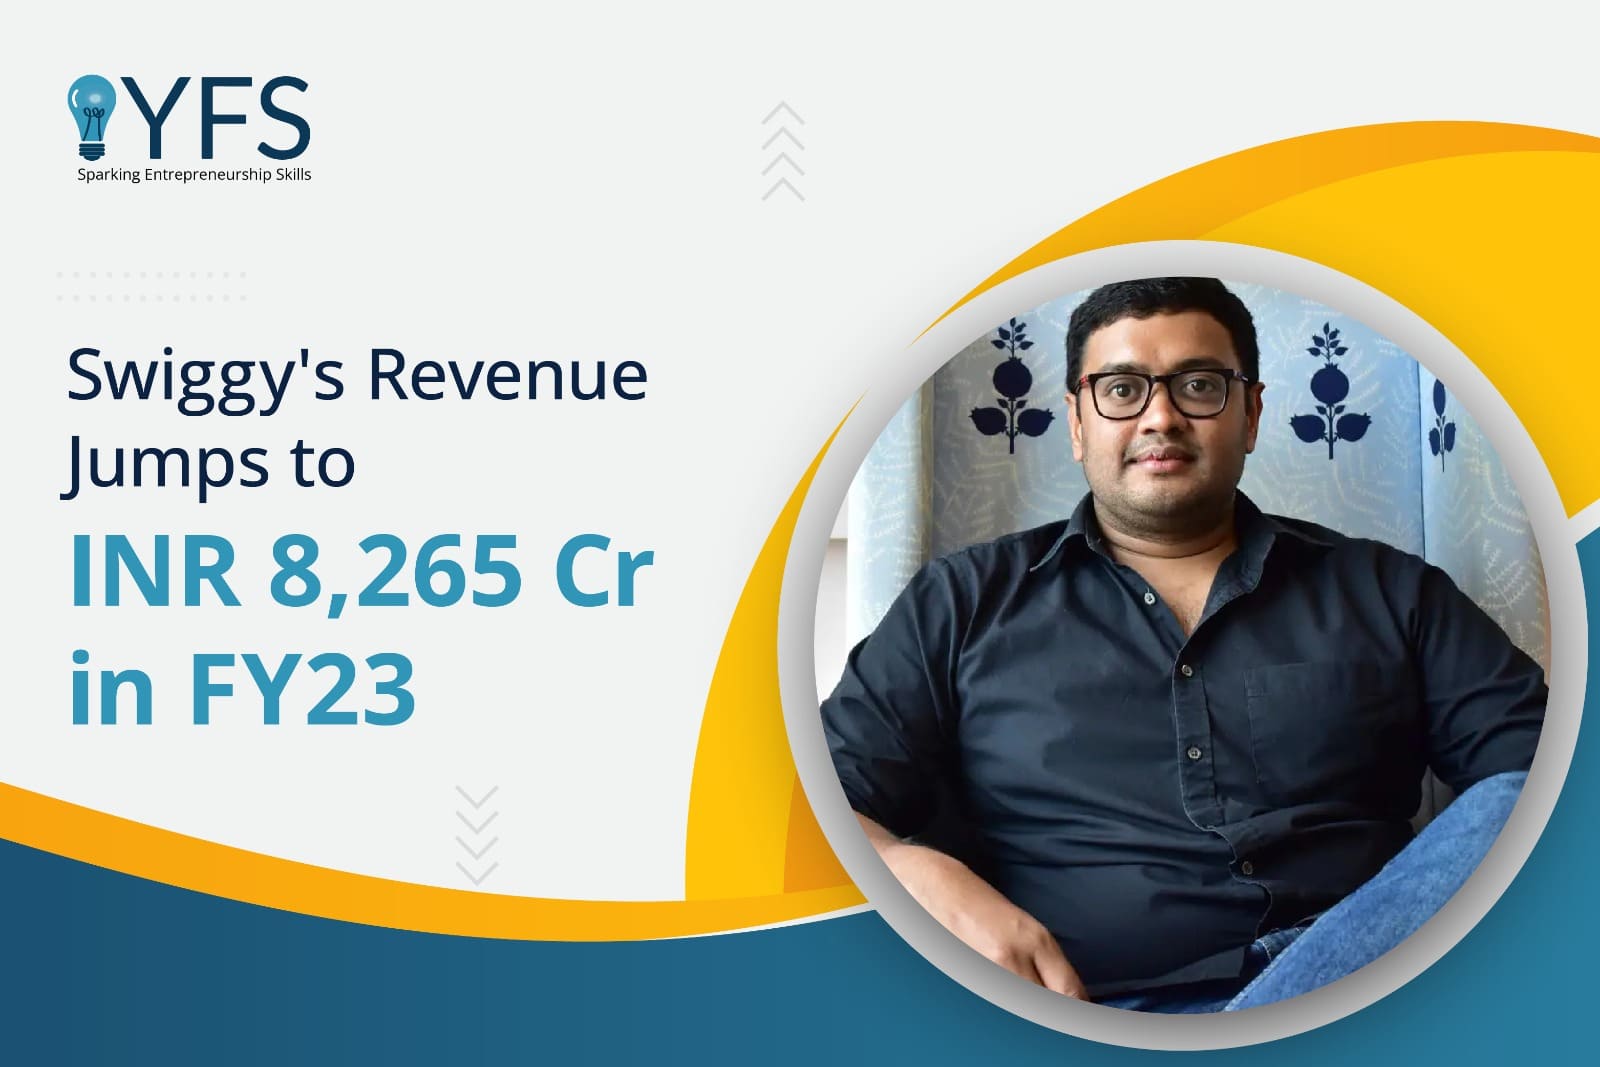 Swiggy's Revenue Jumps to INR 8,265 Cr in FY23